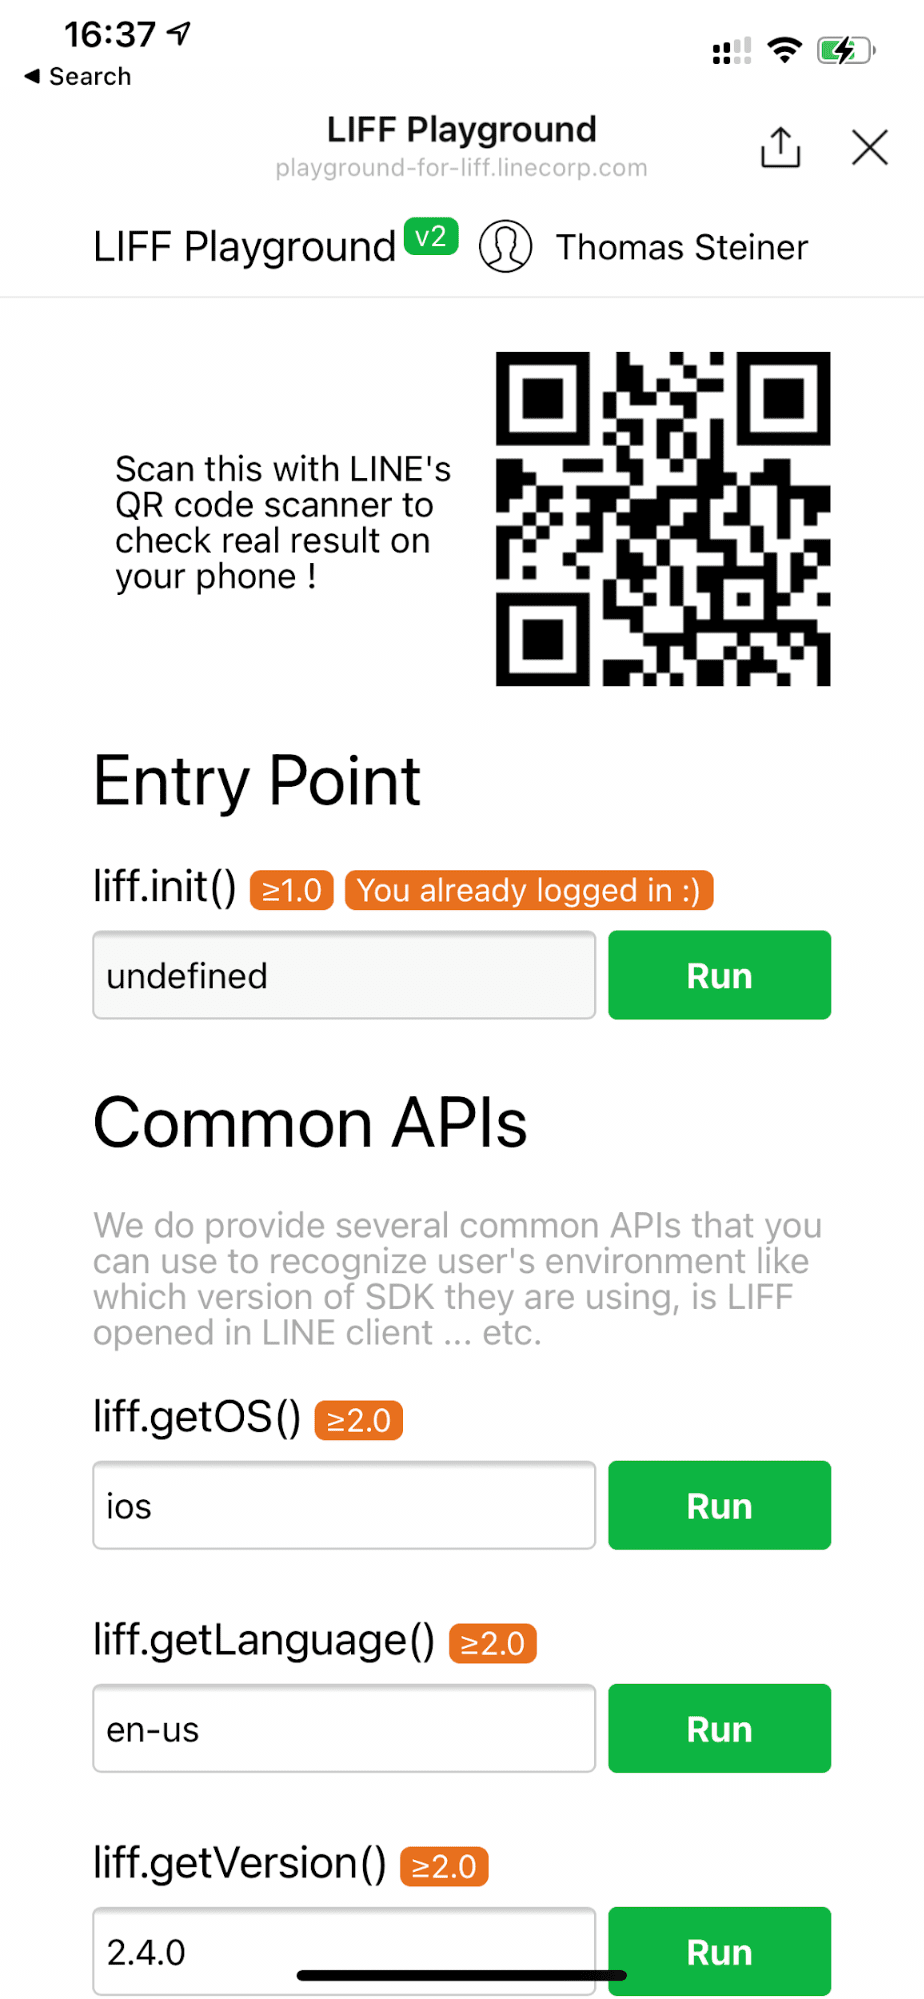 The LINE Playground demo app running on an iOS device showing `liff.getOS()` returning 'ios'.